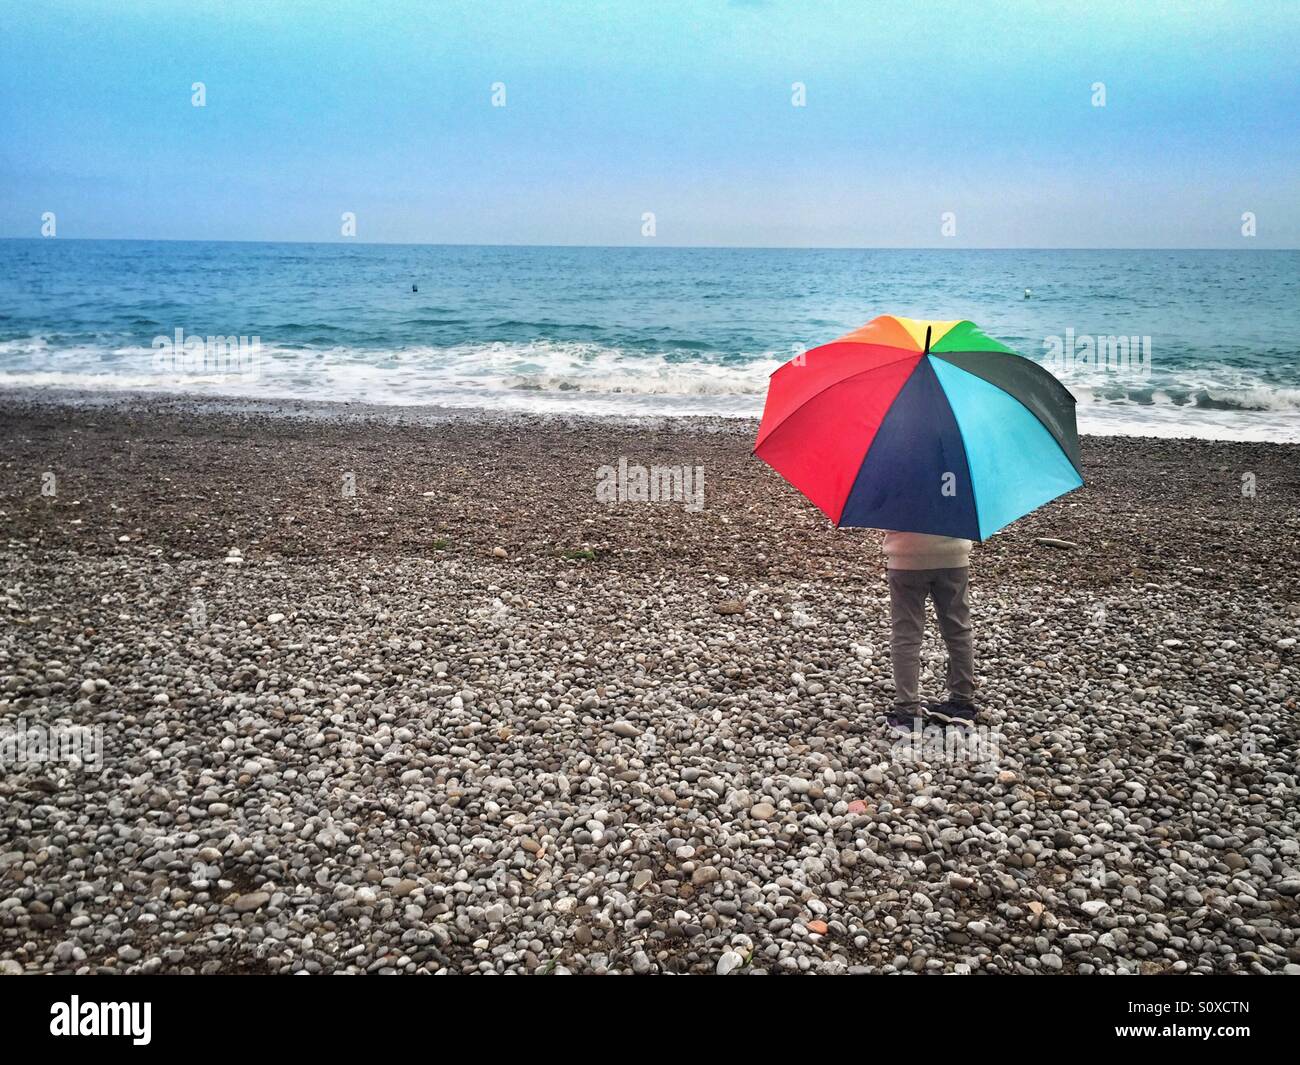 Girl on the beach with a colorful umbrella Stock Photo